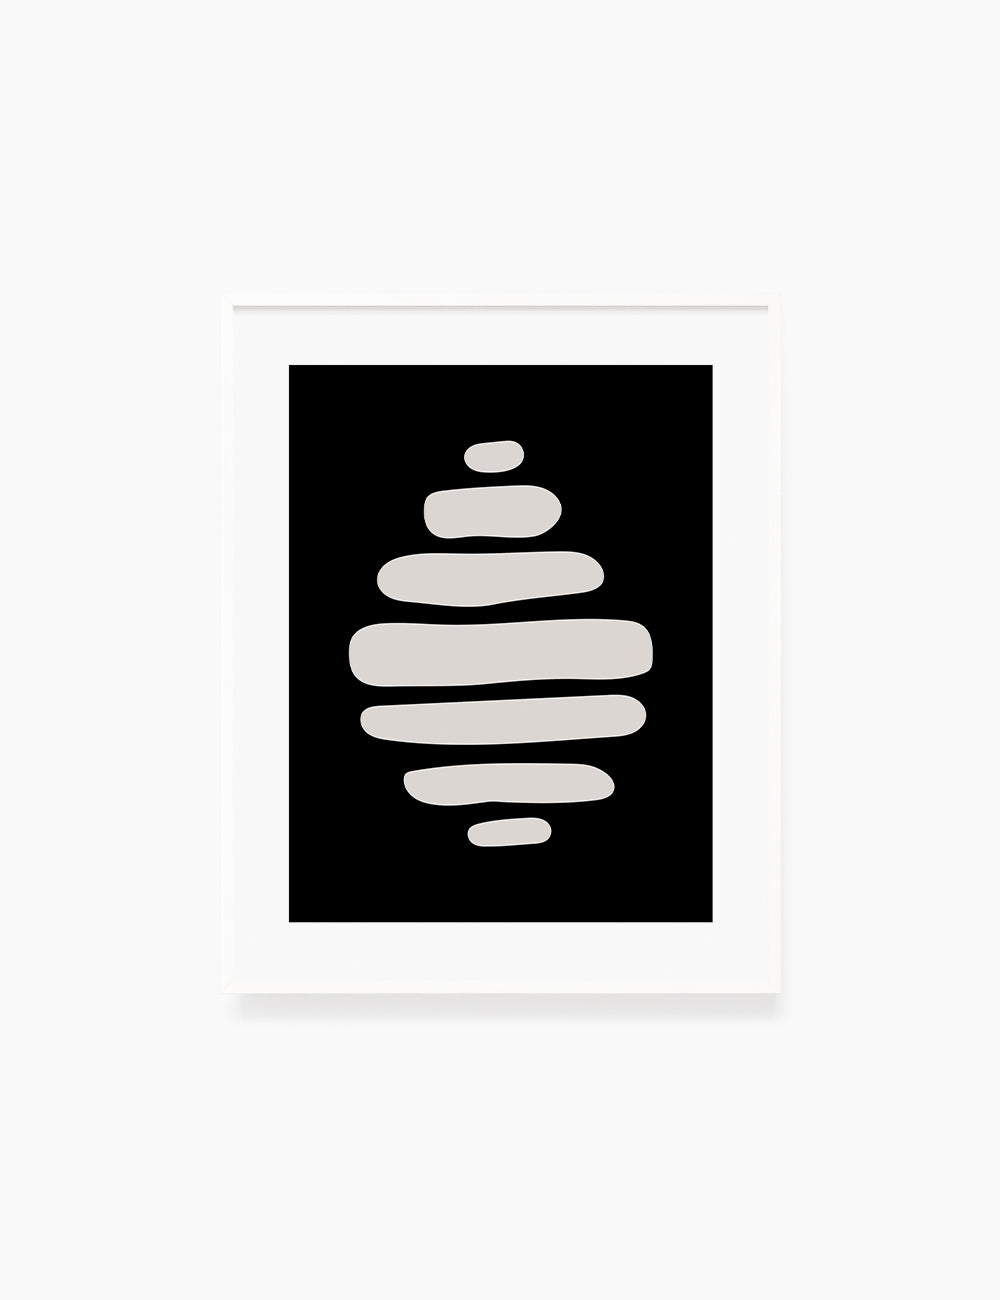 Black and Beige Minimalist Art. Abstract Shapes.